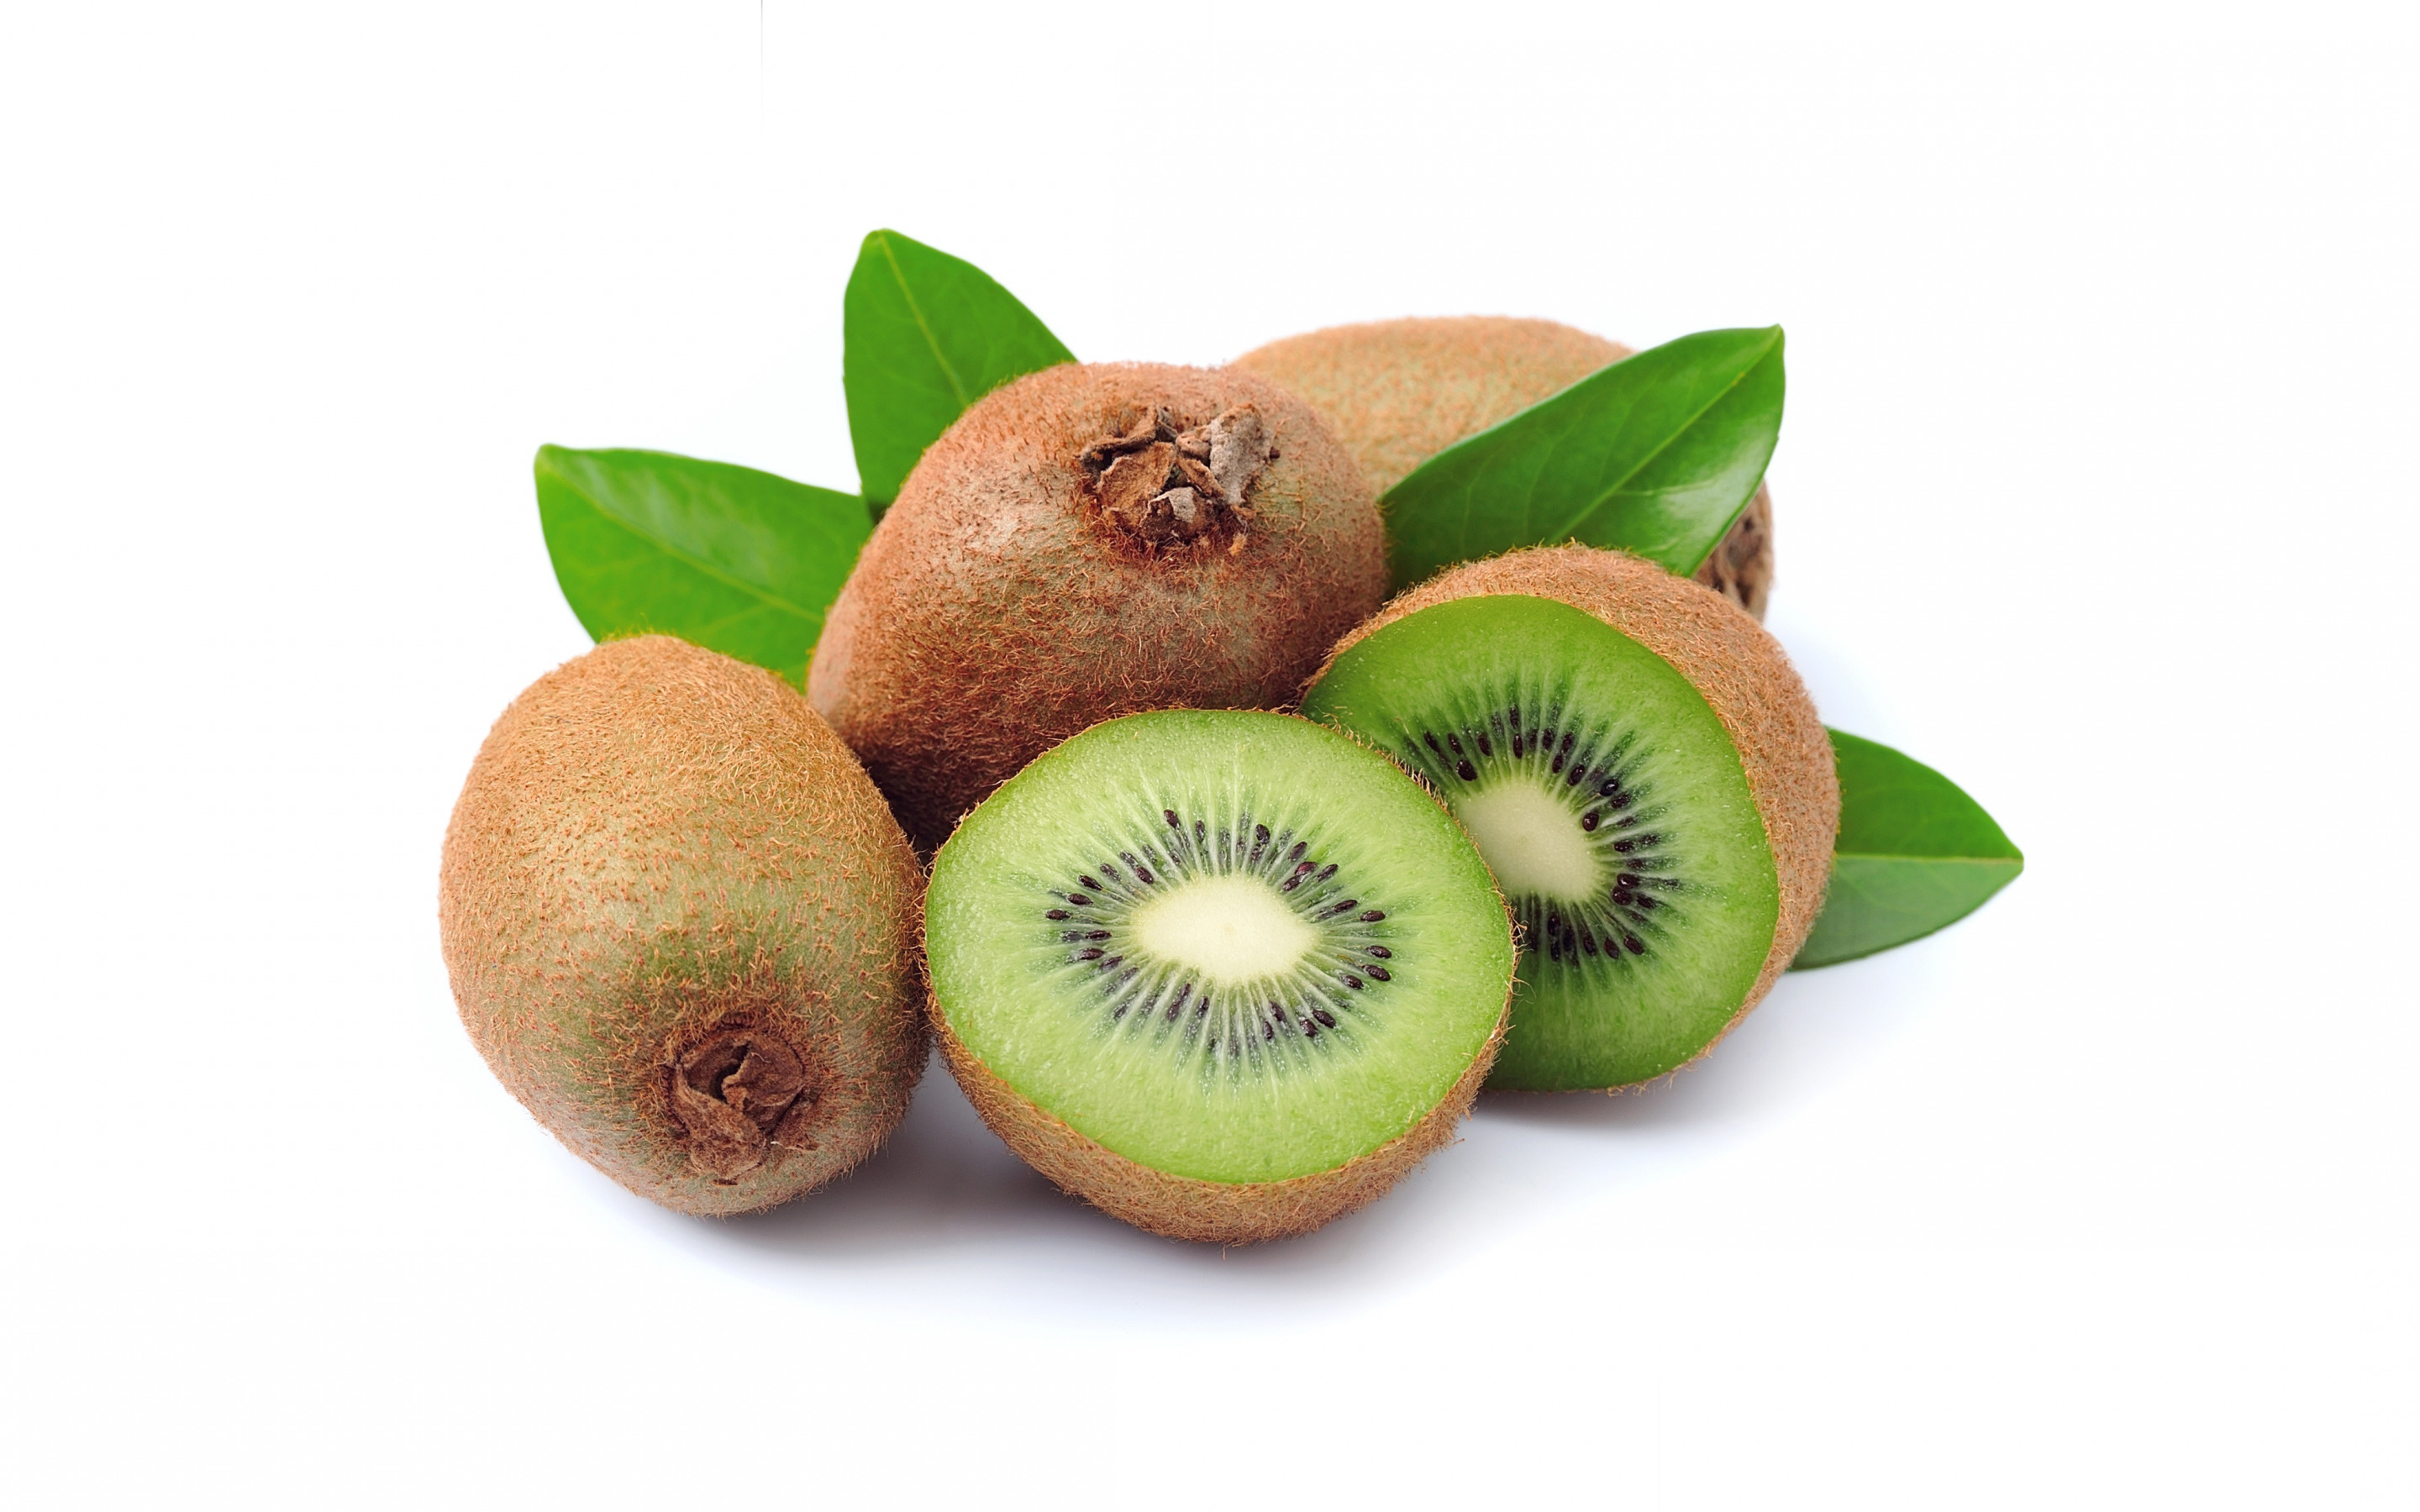 Wallpapers kiwi white background, Healthy food, Fresh and green, Appetizing image, 2880x1800 HD Desktop